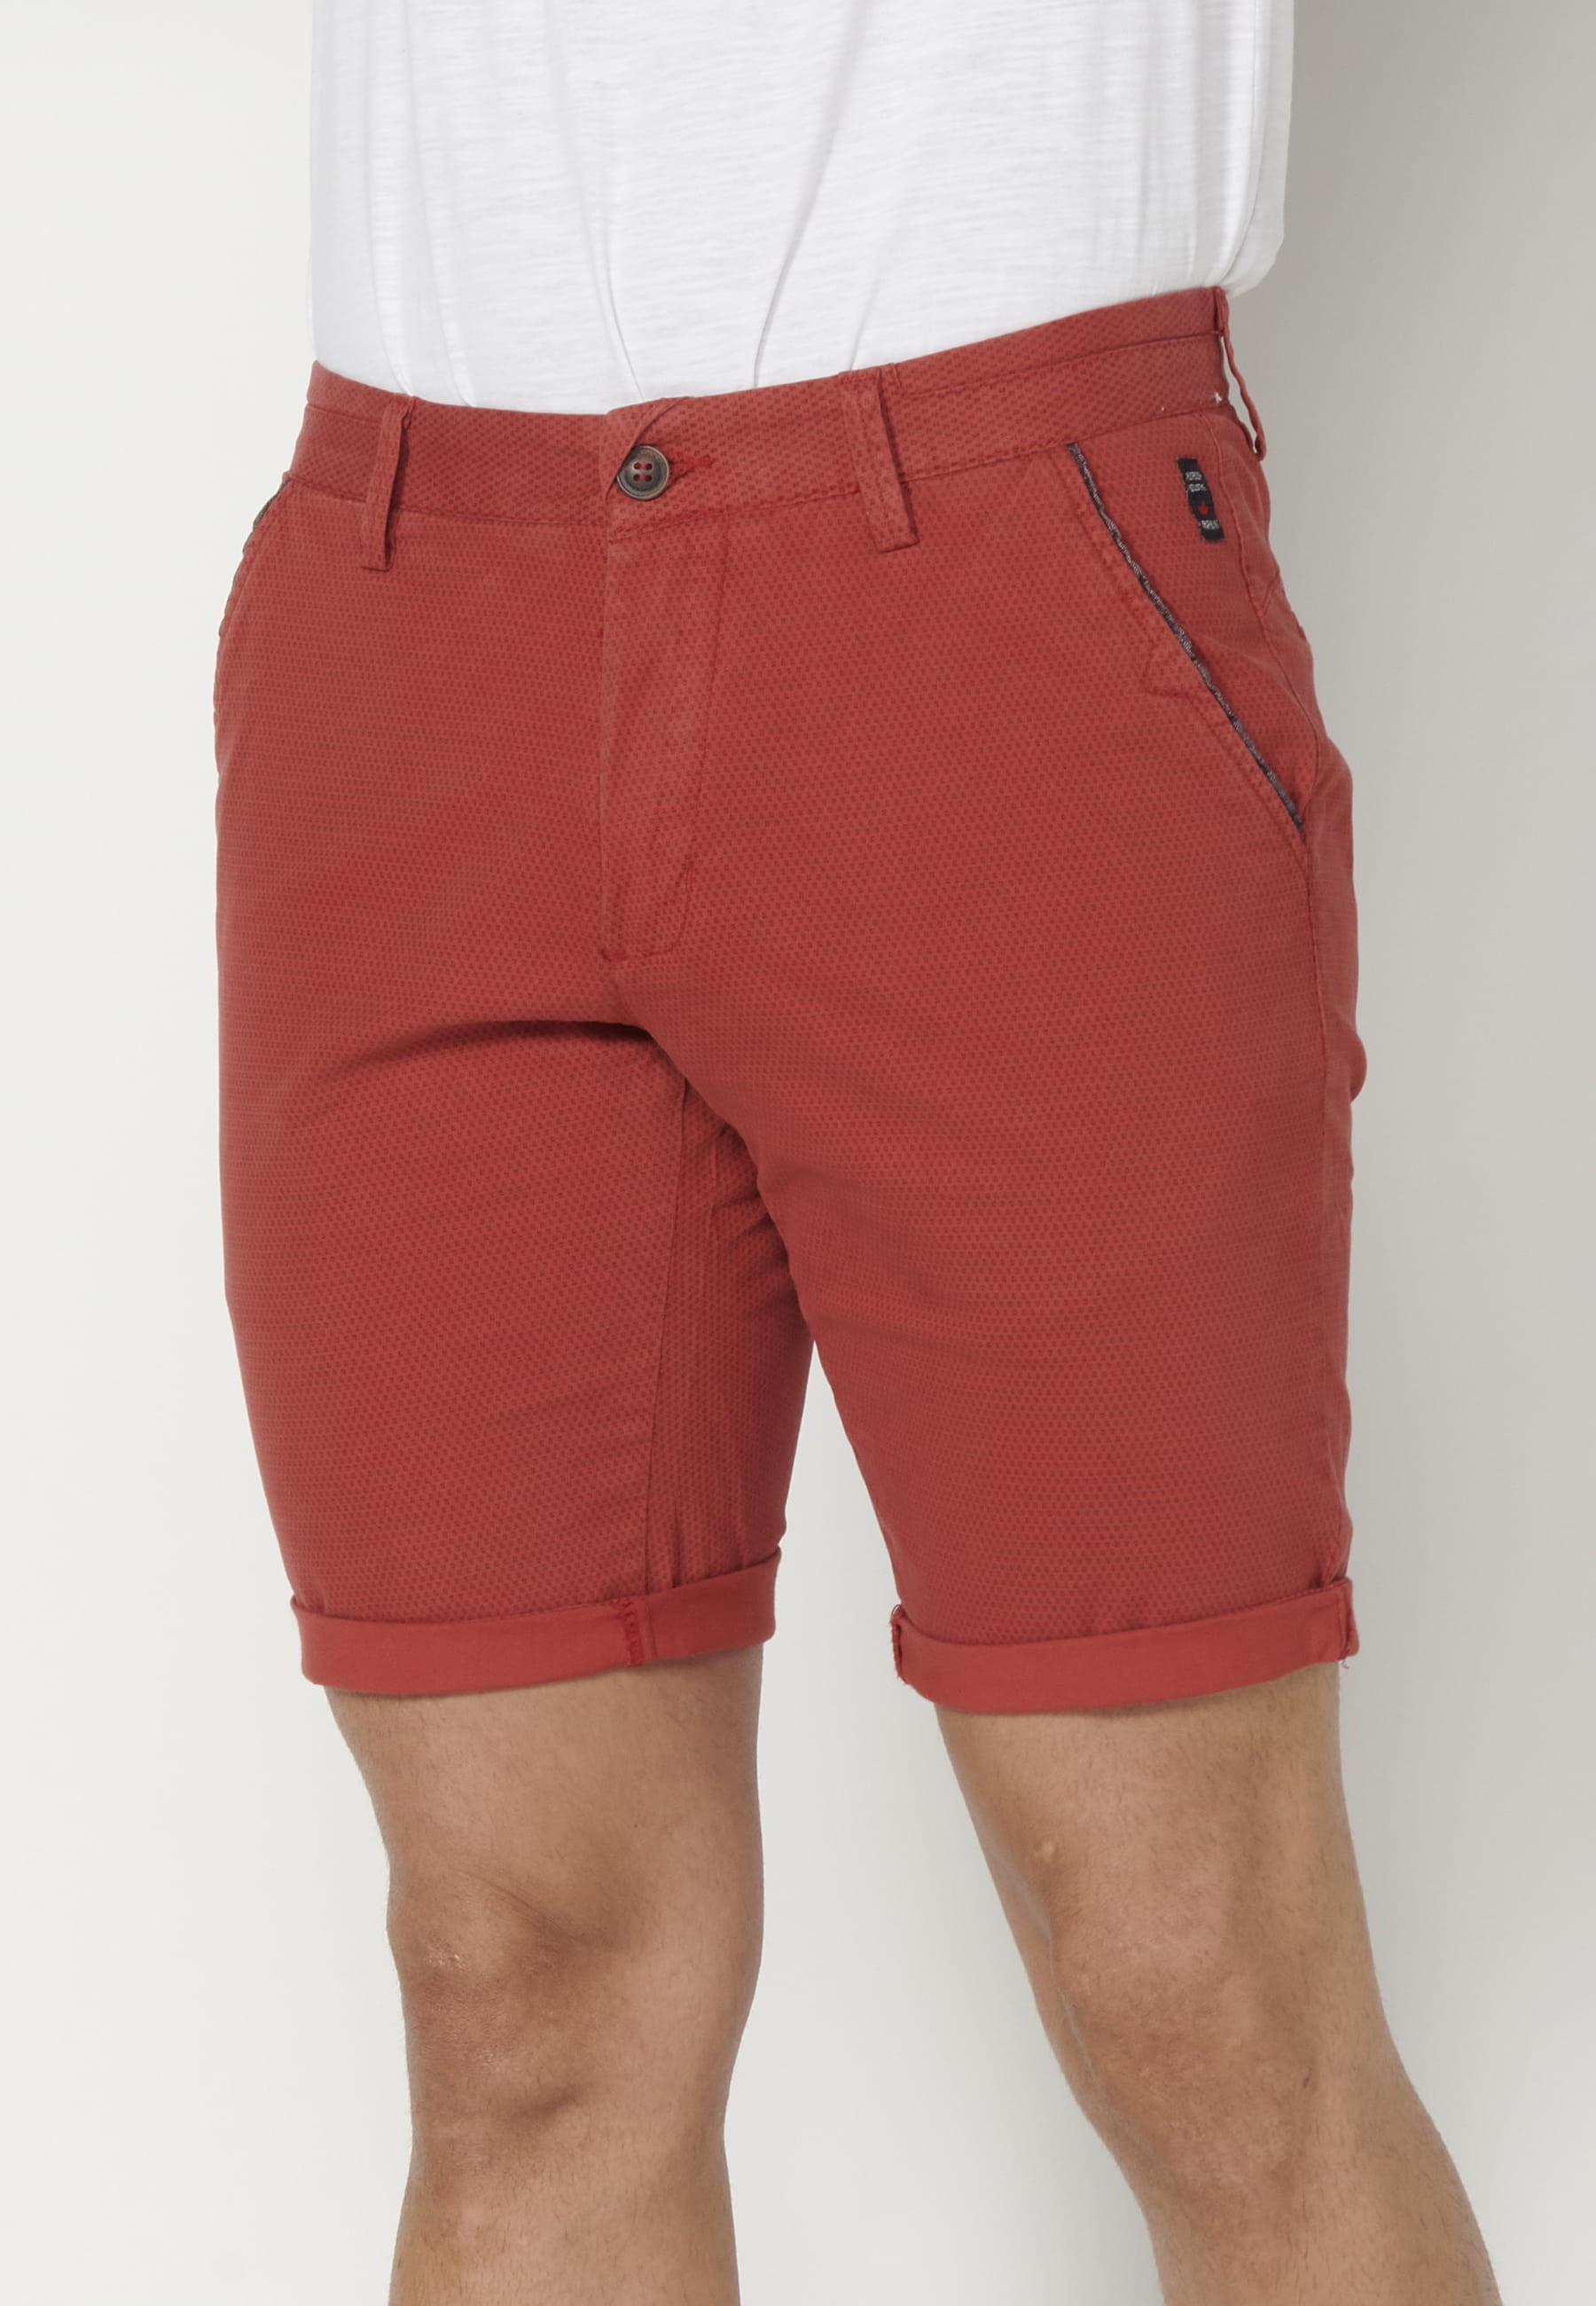 Red Chinese style Bermuda shorts for Men